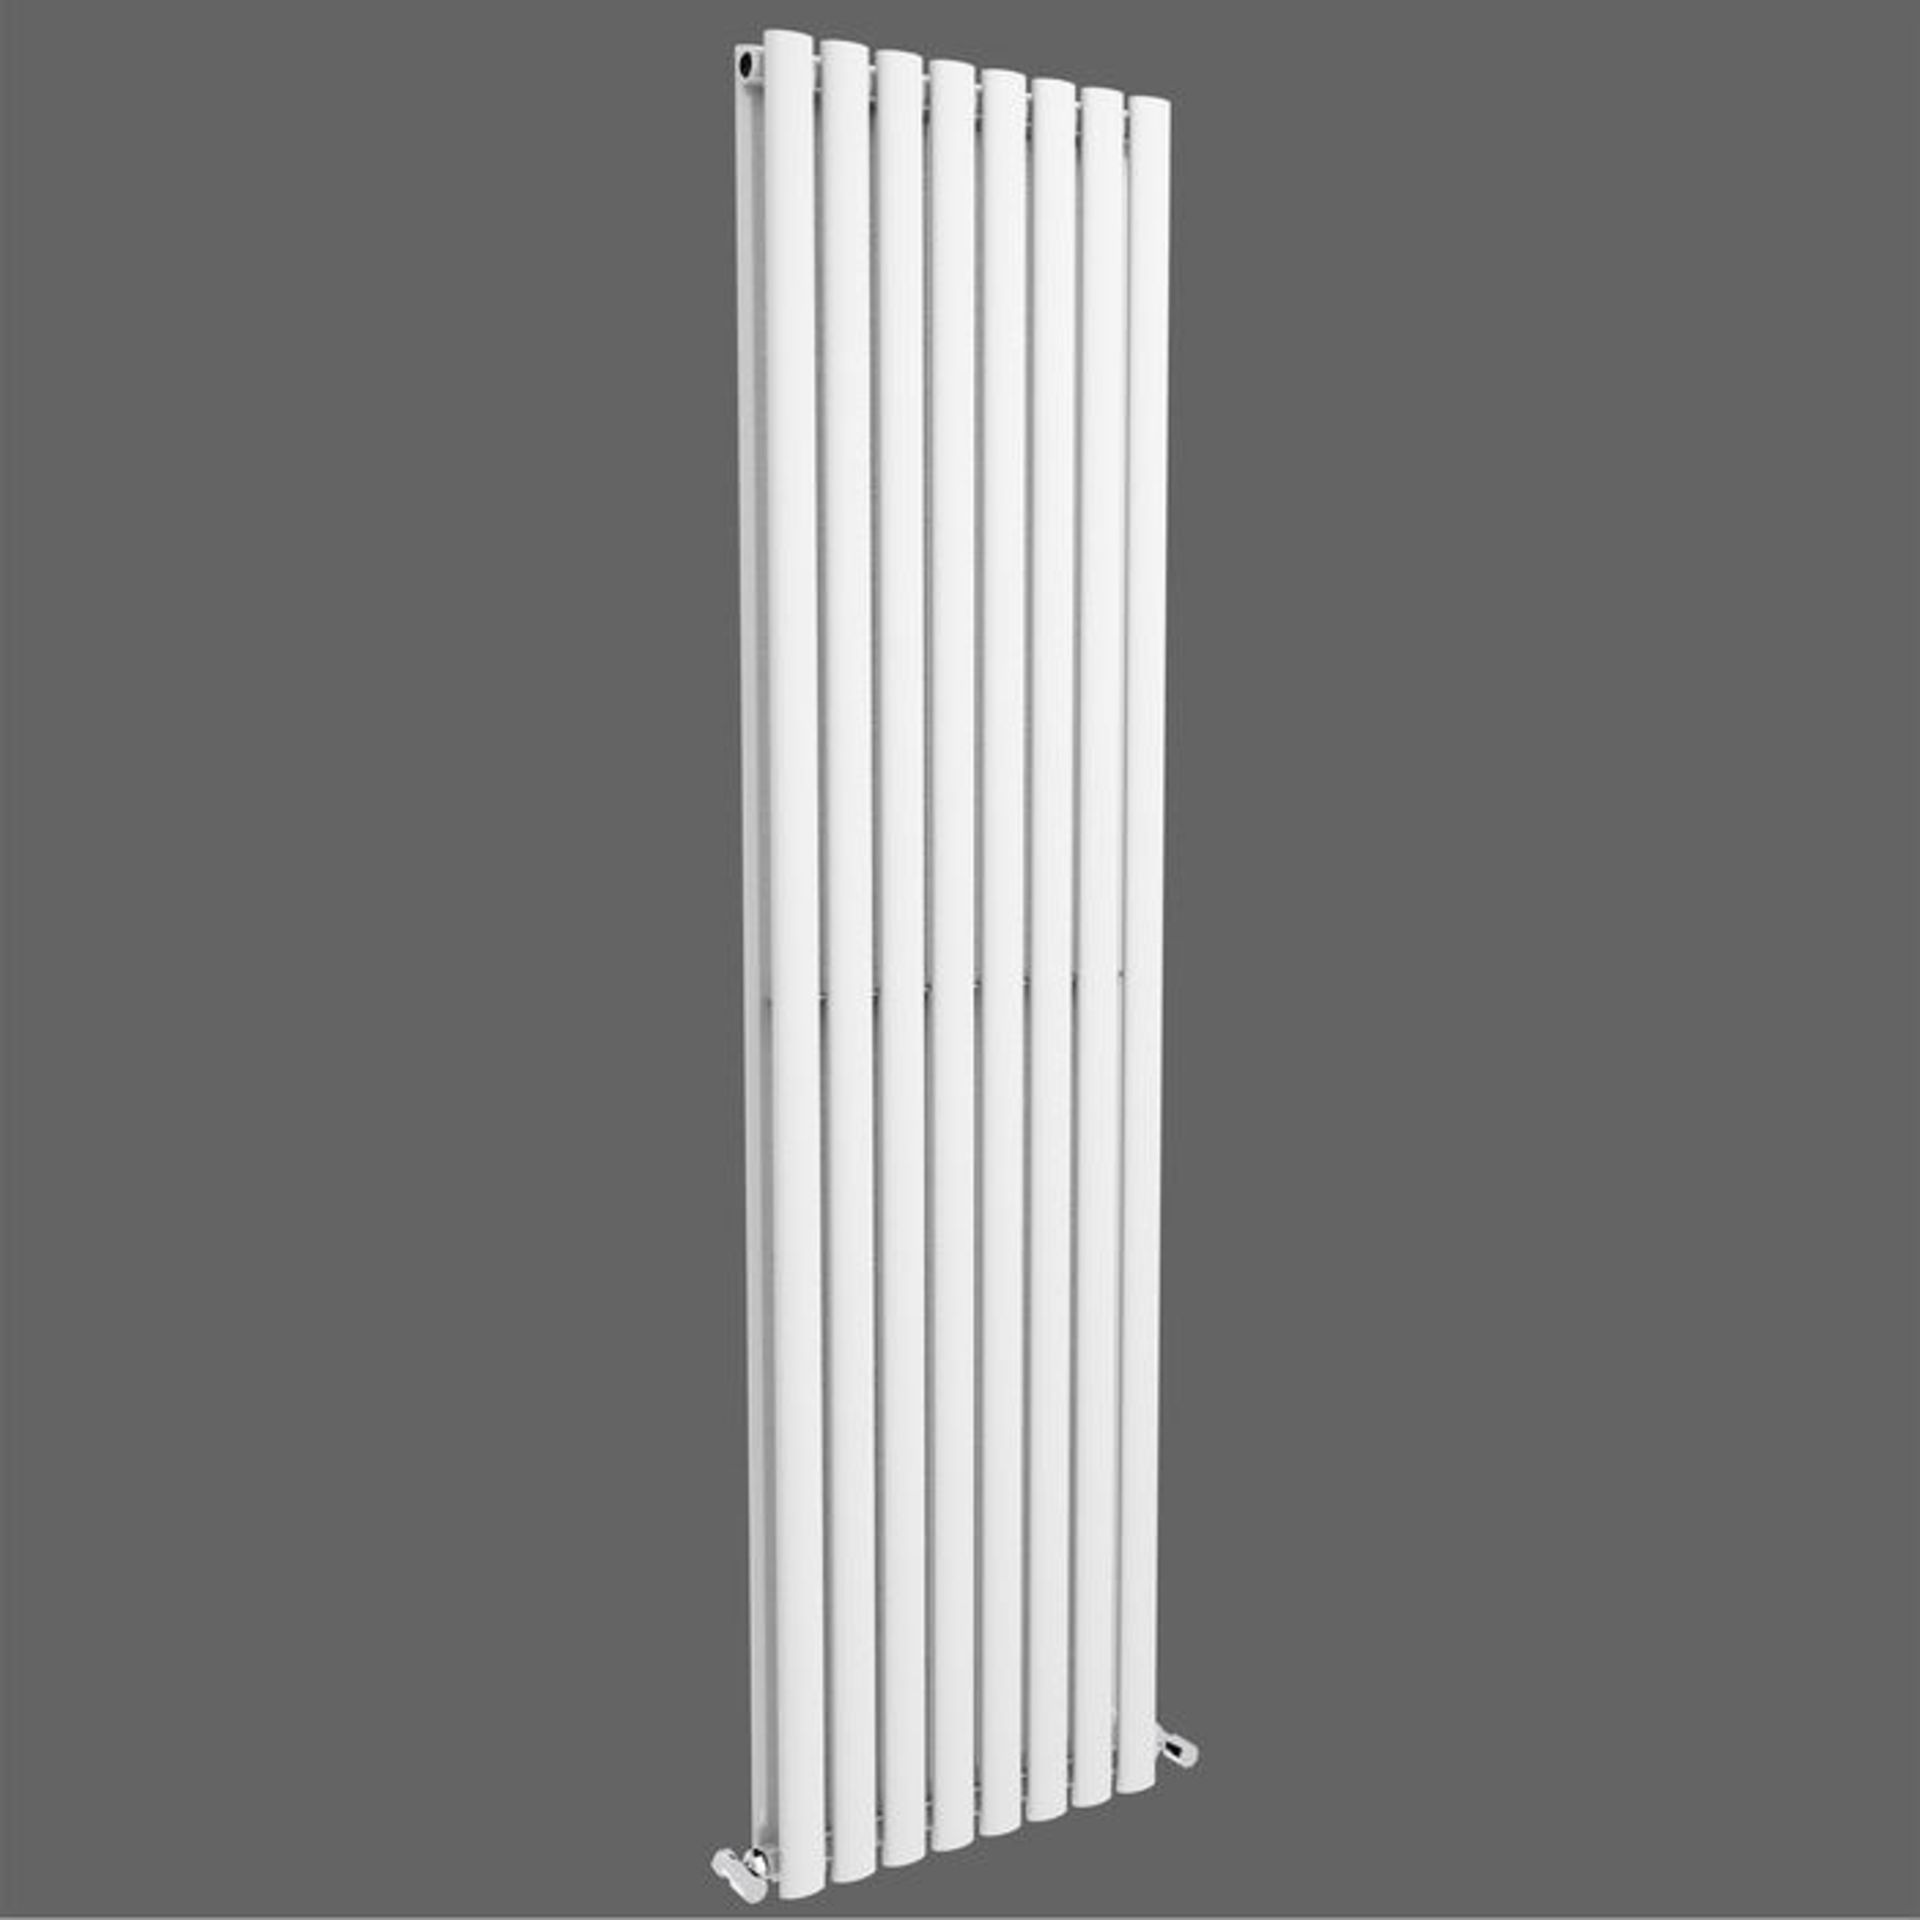 Brand New 1800x480mm Gloss White Double Oval Tube Vertical Radiator.RRP £499.99.Made from high quali - Image 3 of 3